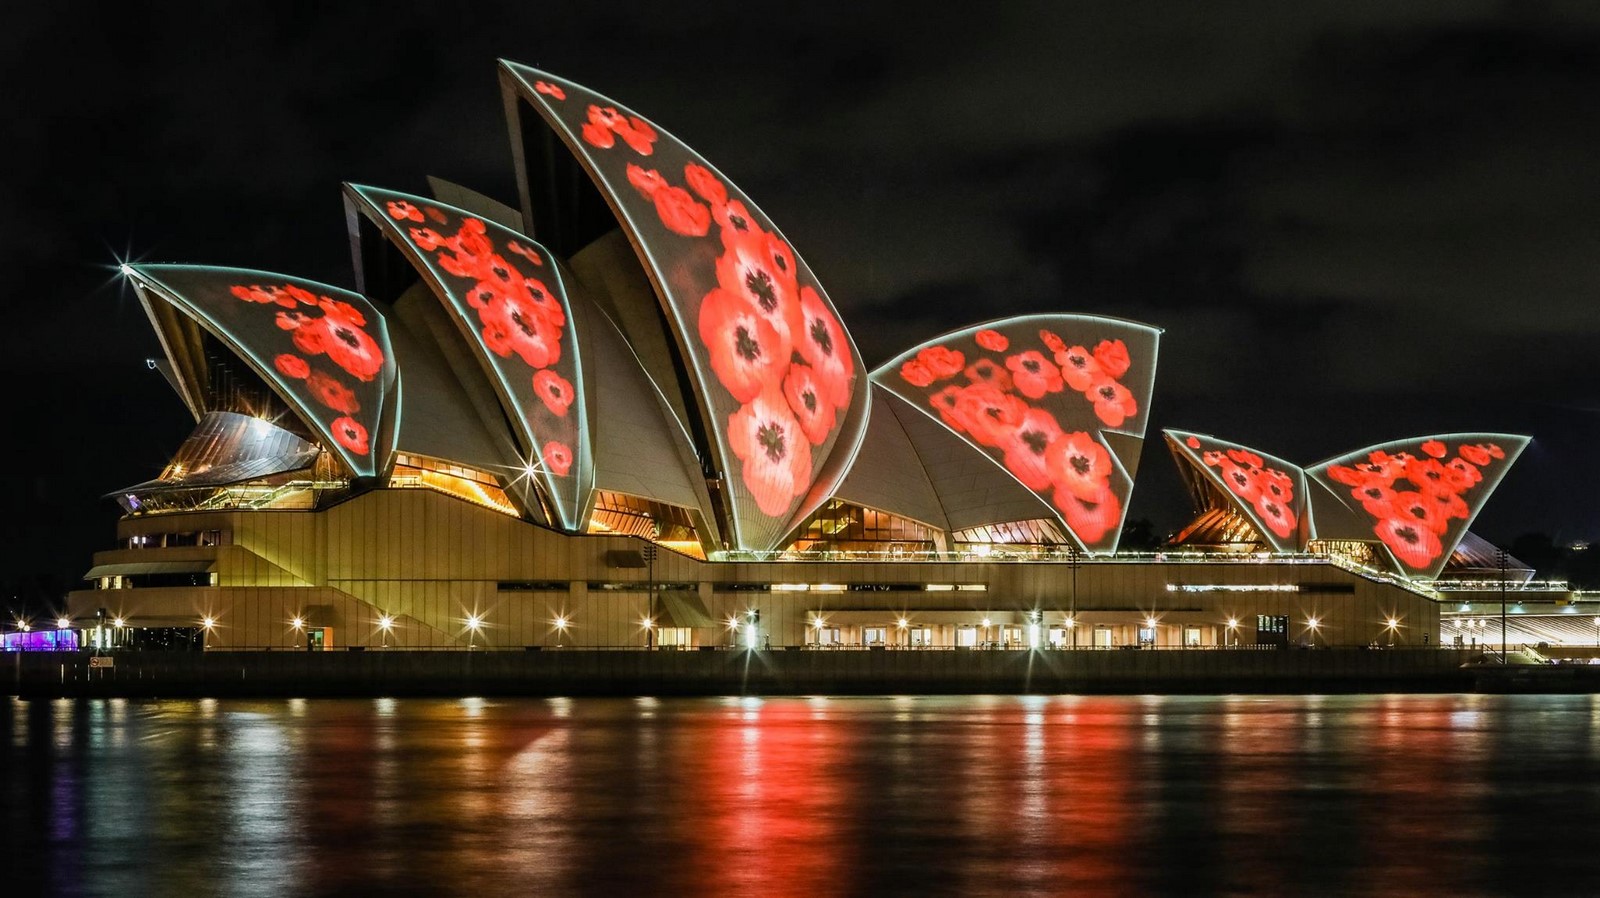 Buildings In Australia:15 Architectural Marvels Every Architect Must See - Sheet2